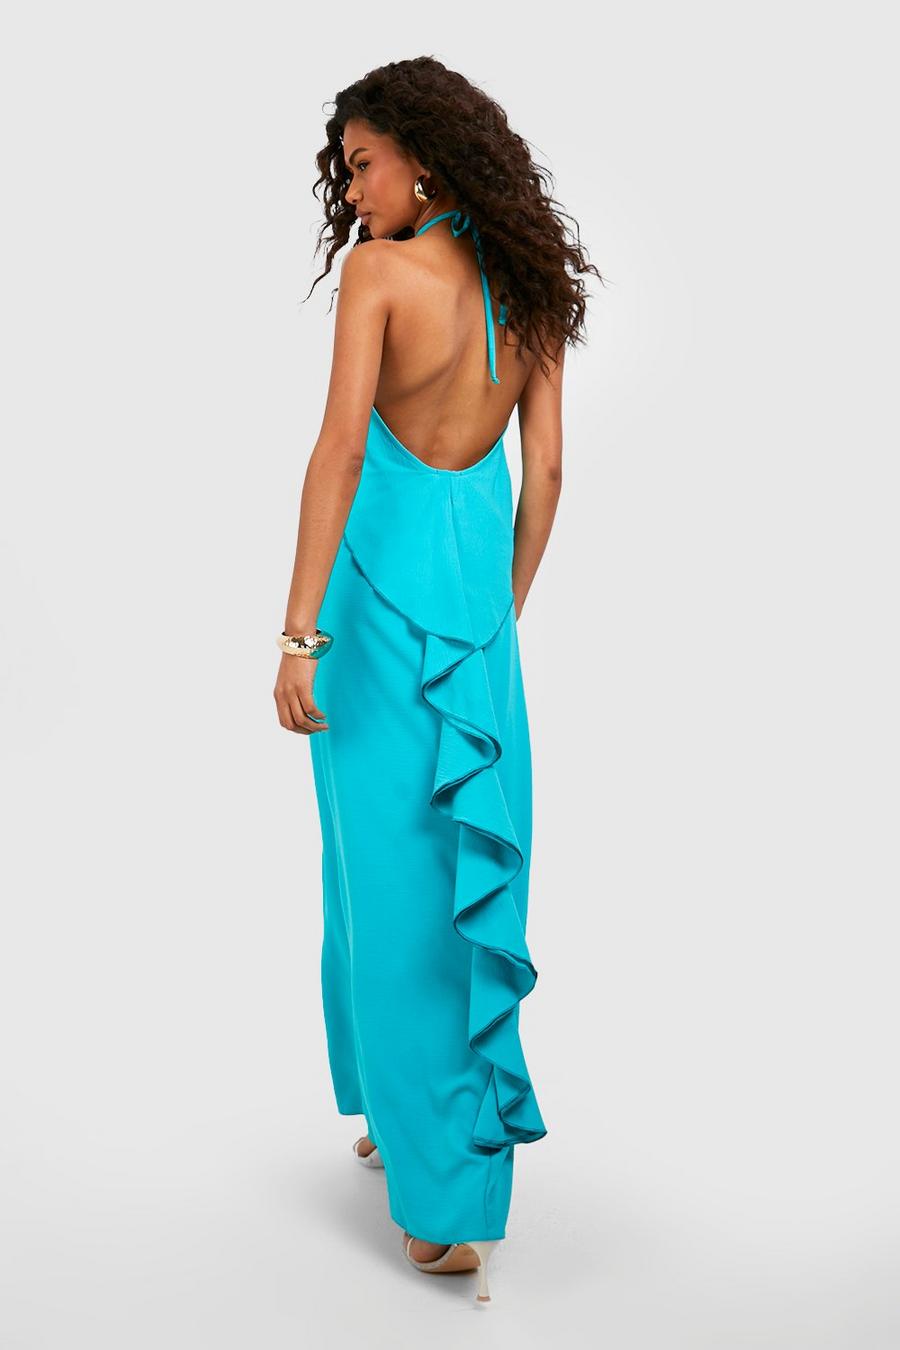 Aqua blue Cheesecloth Textured Low Back Ruffle Tiered Maxi Dress